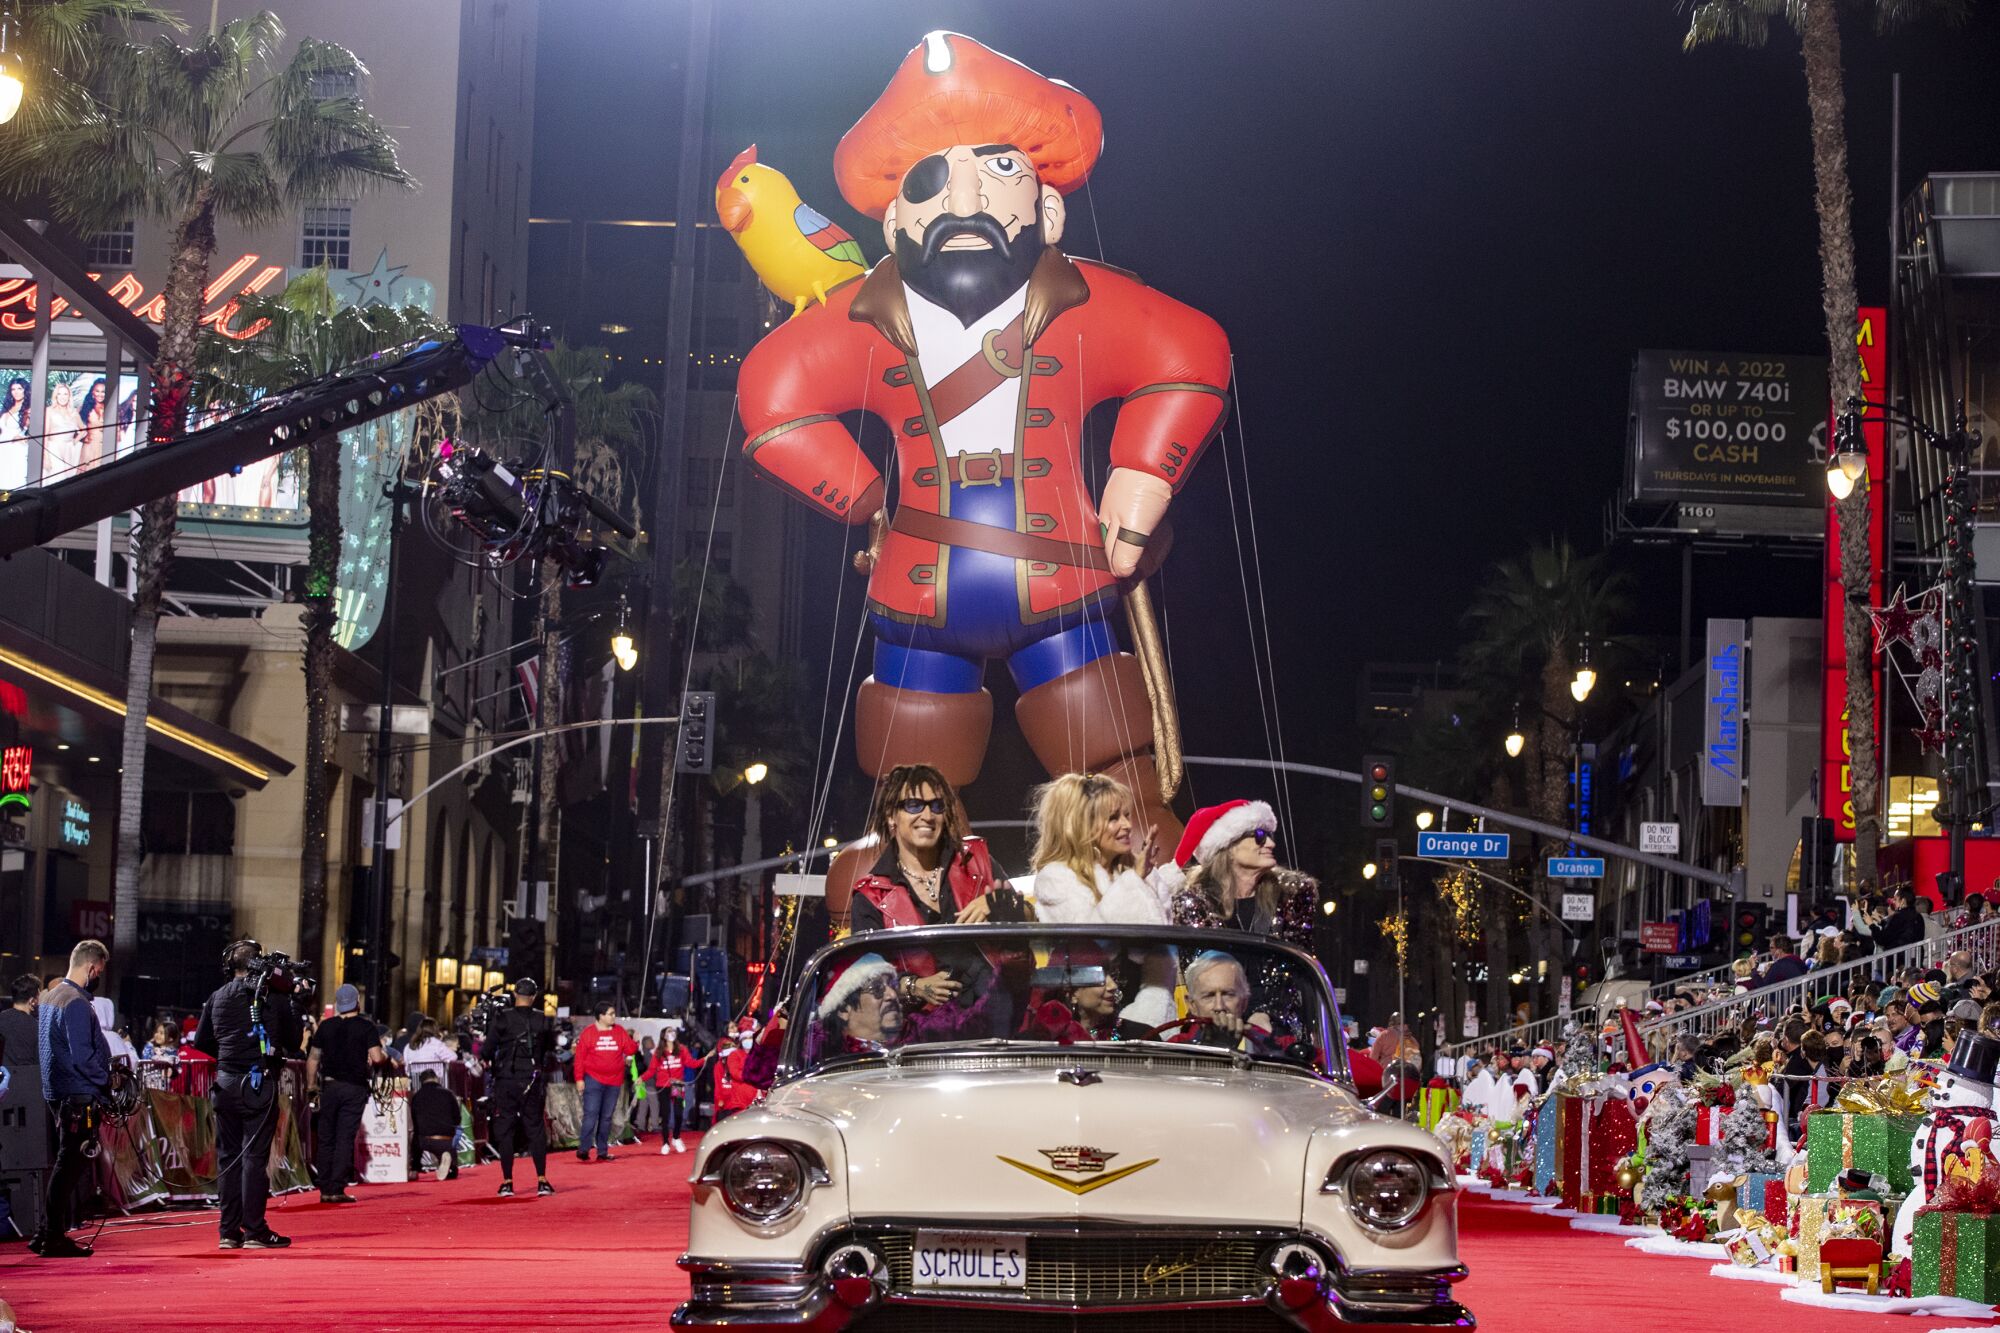 A four-story pirate parade float makes its way down a red-carpeted Hollywood Boulevard